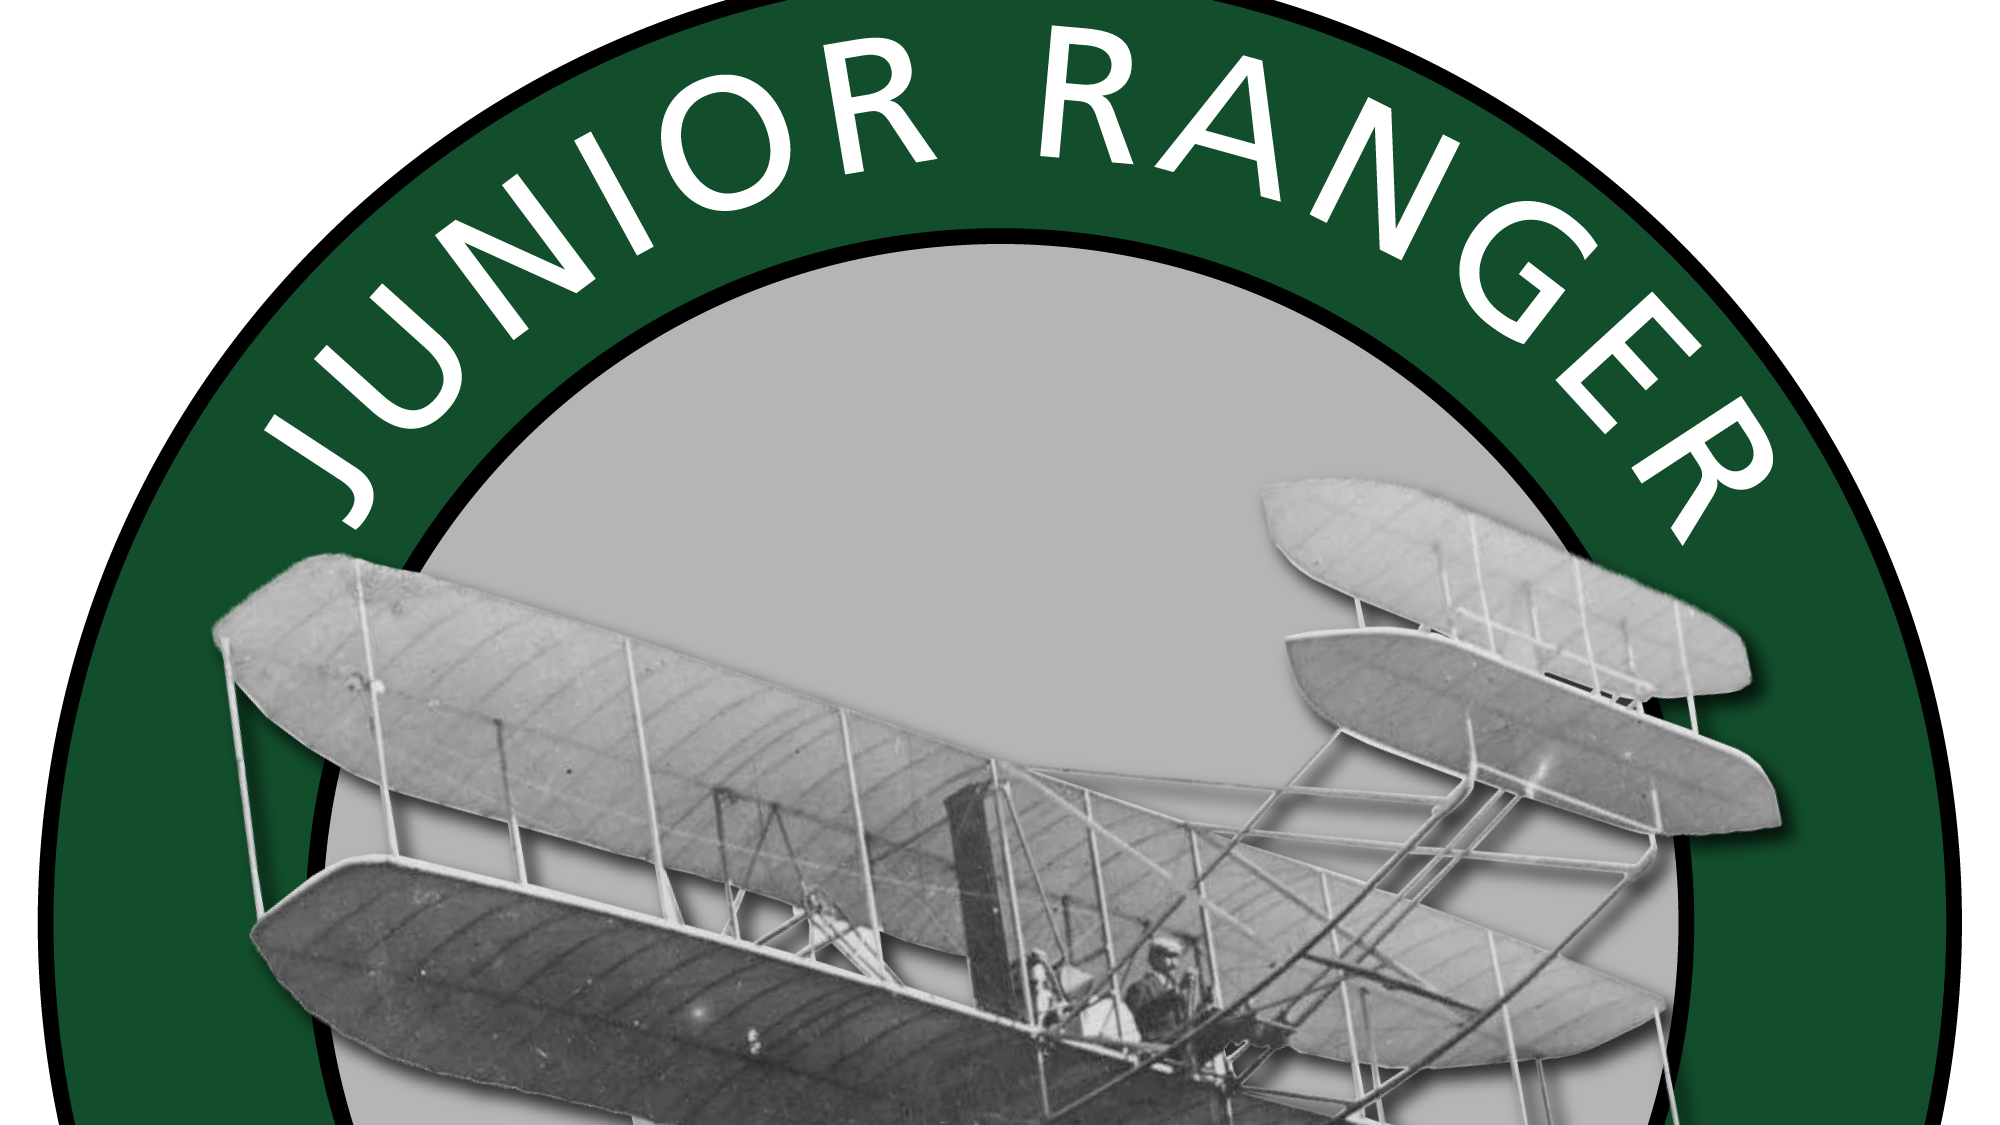 A picture of a Wright brothers plane on the Jr. Ranger logo background